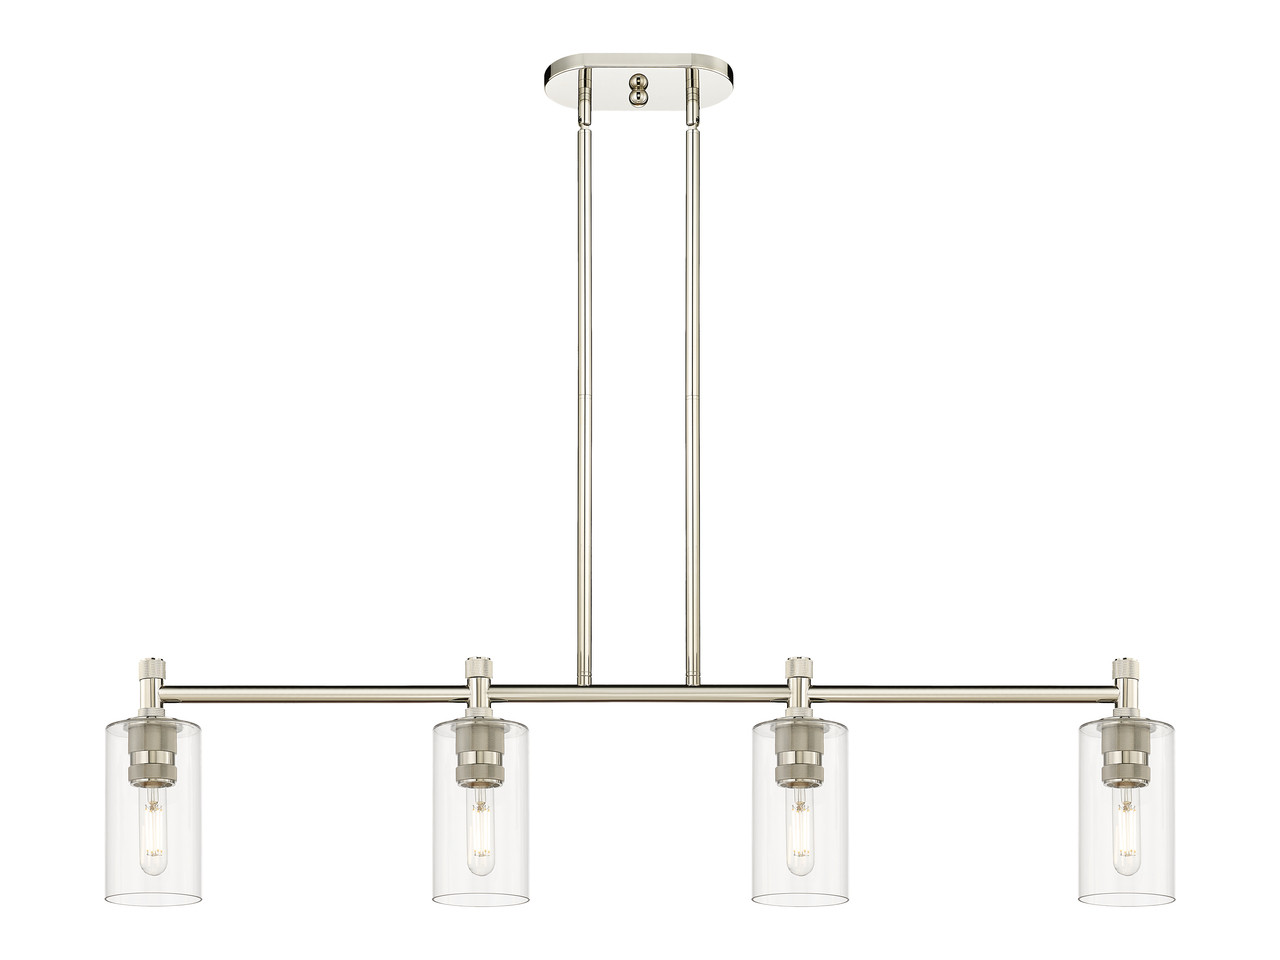 INNOVATIONS 434-4I-PN-G434-7CL Crown Point 4 43.75 inch Island Lighting Polished Nickel